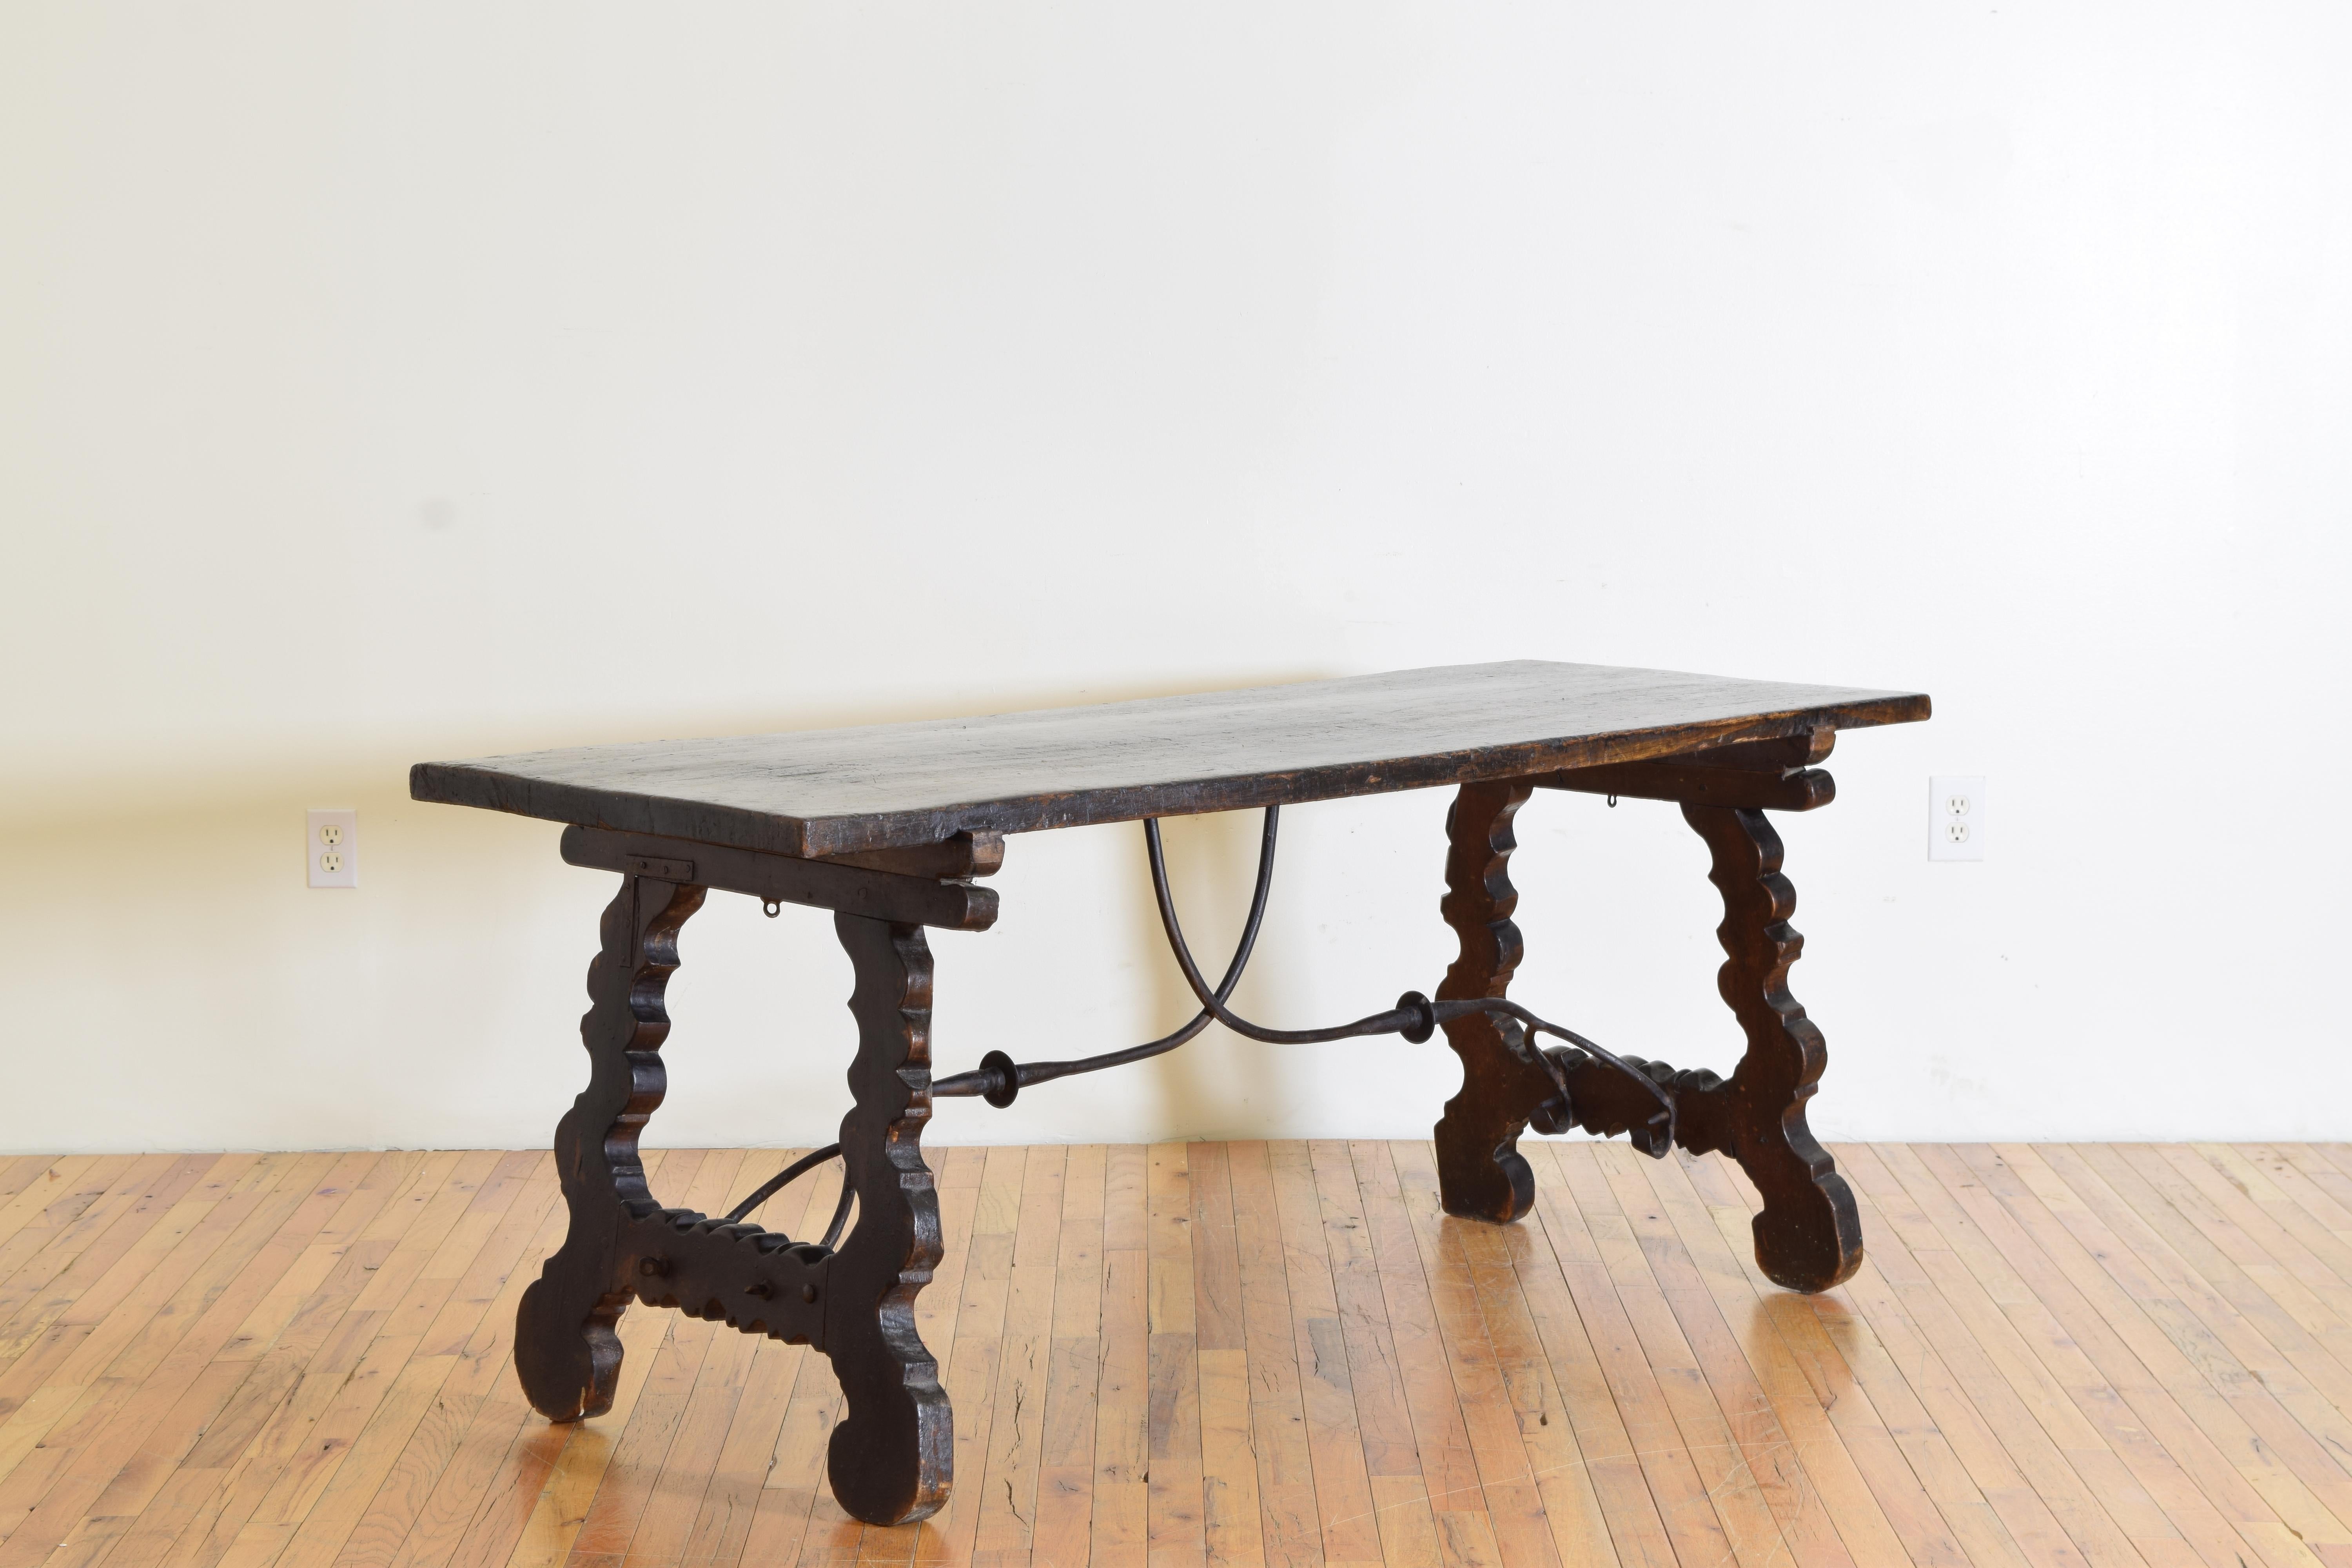 constructed entirely of dark walnut and iron, having a solid one board top supported by carved trestle-form legs joined by likely its original double pronged wrought iron stretcher